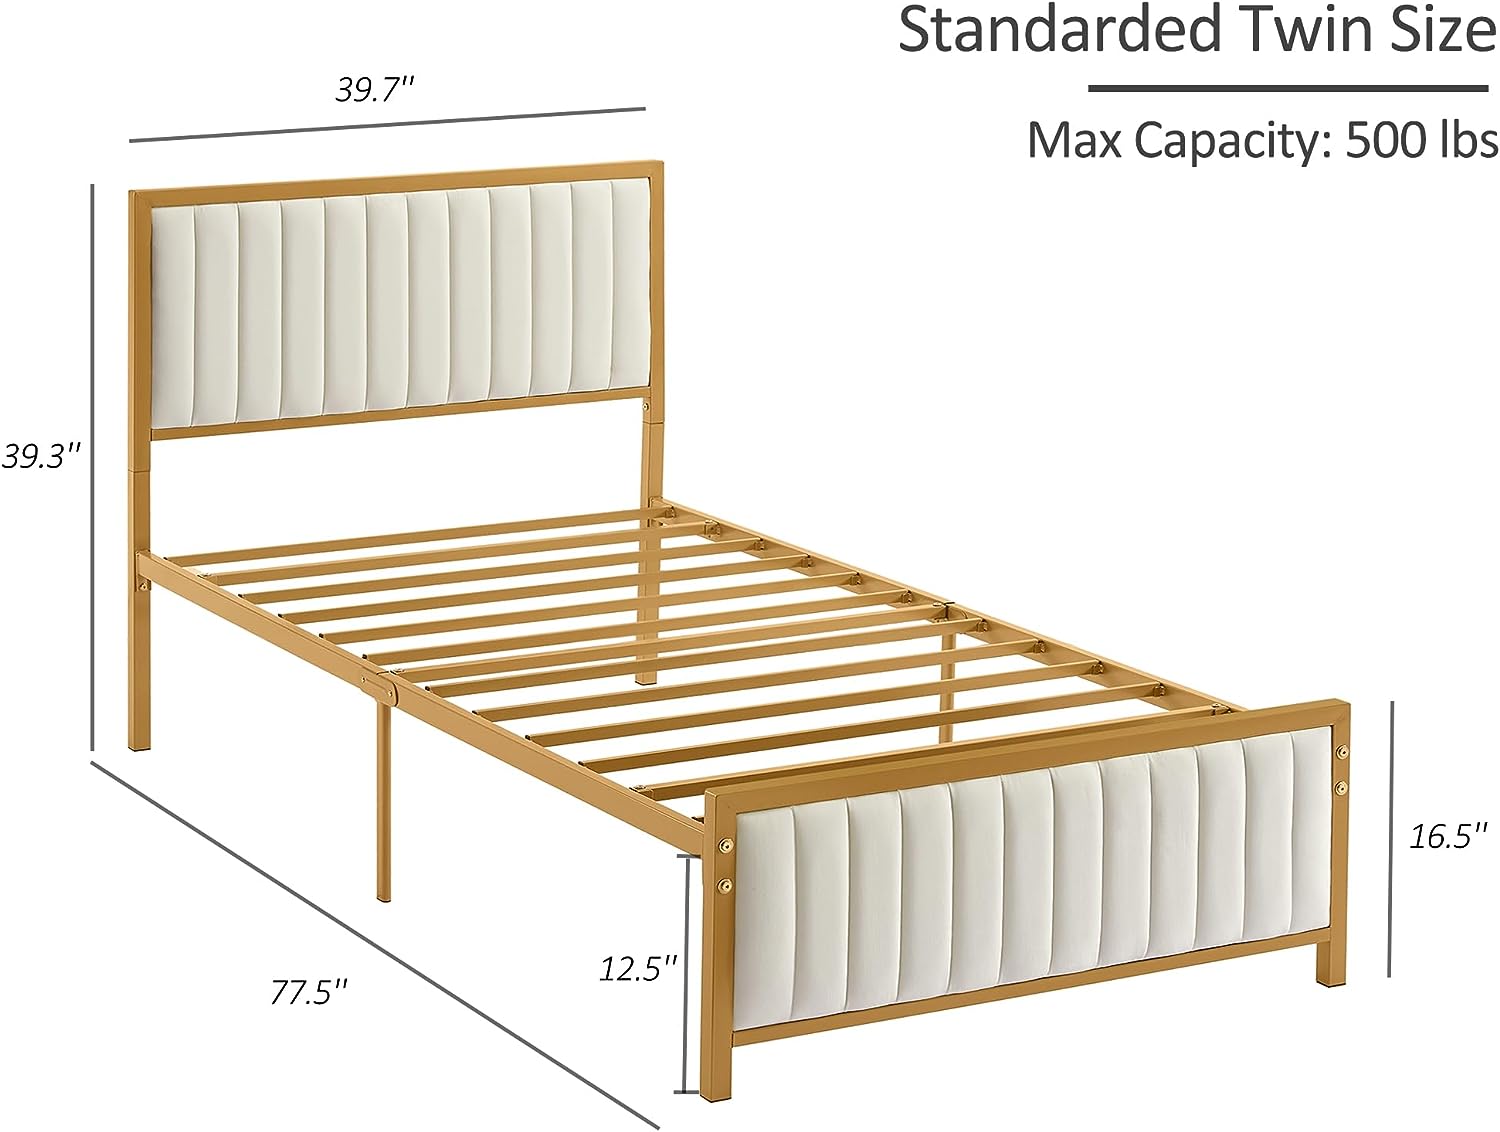 VECELO Bed Frame with Upholstered Tufted Headboard & Footboard